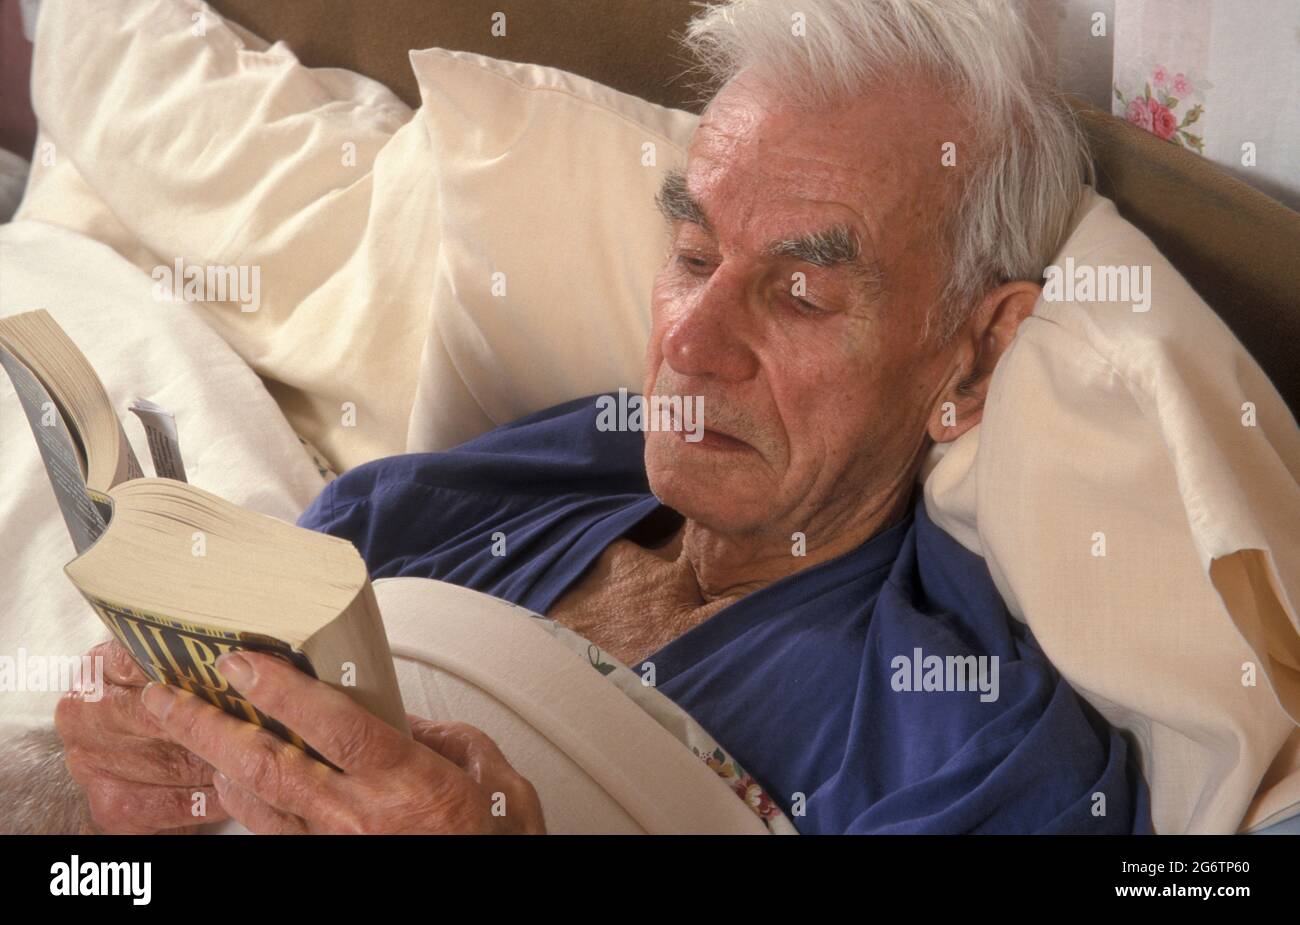 elderly man in bed reading a book Stock Photo